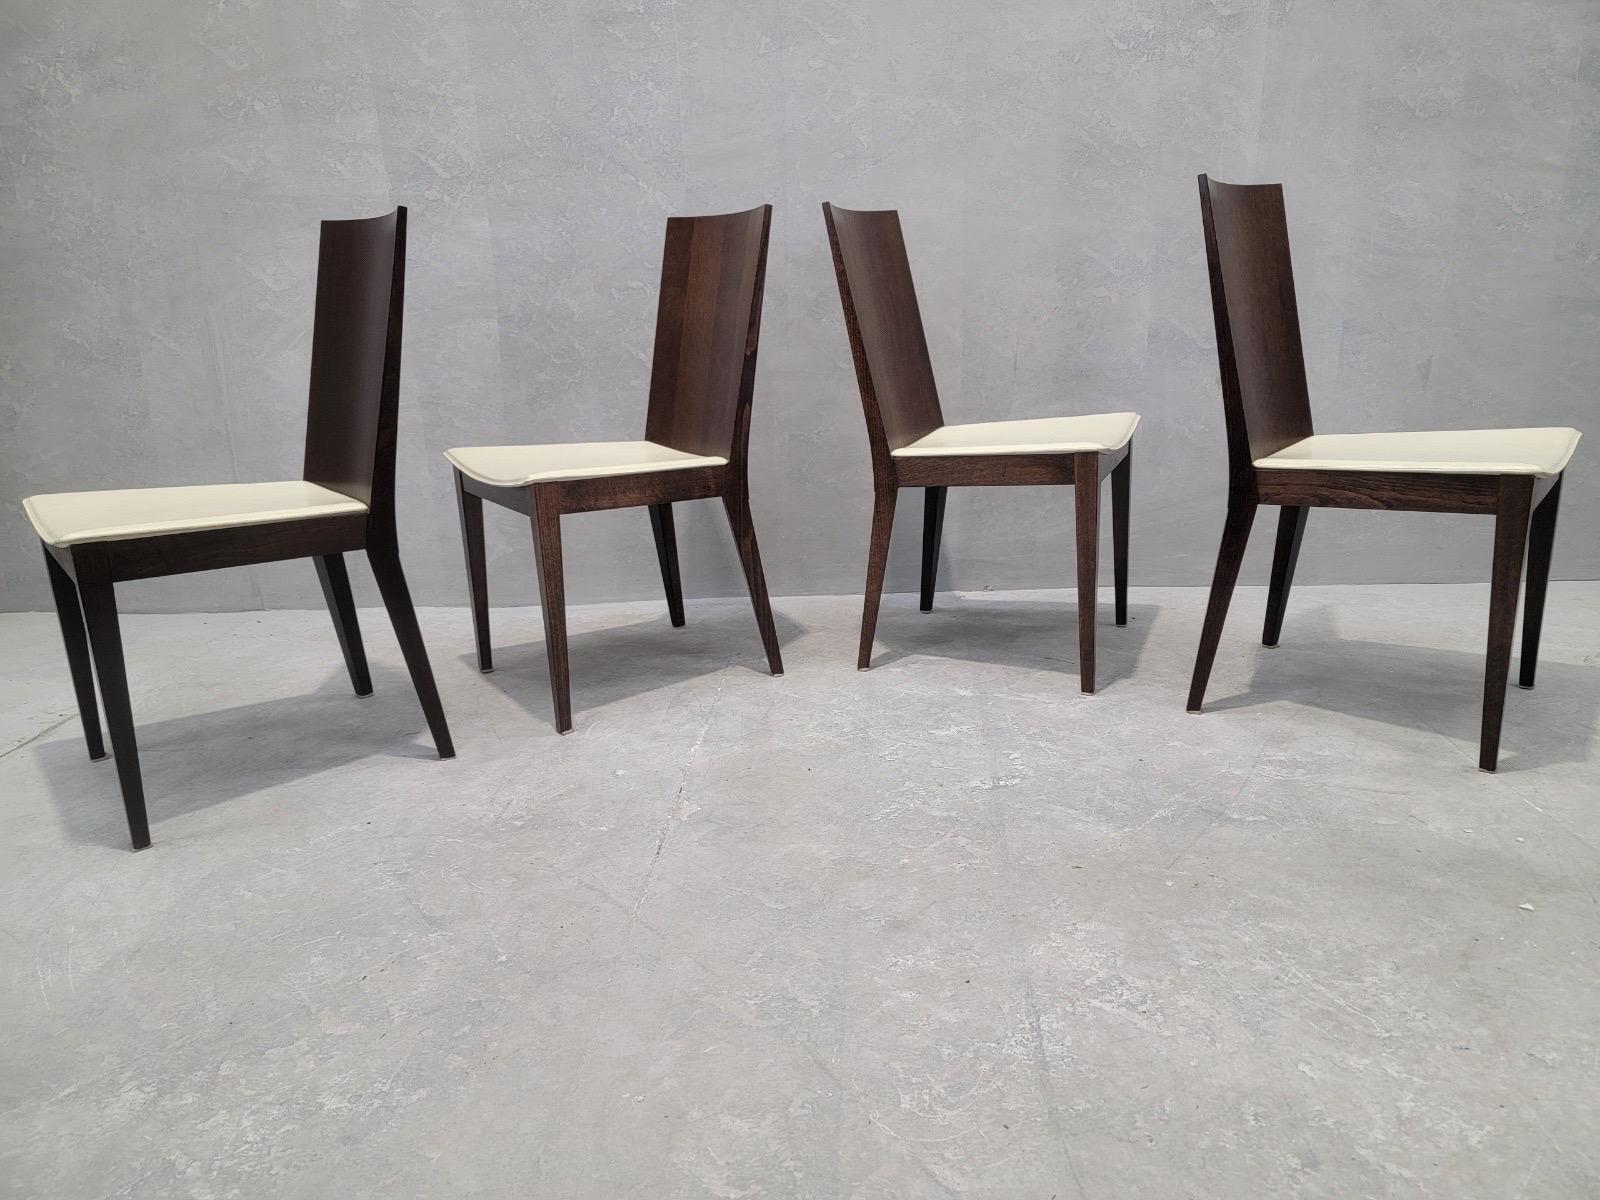 Contemporary Postmodern Italian Walnut & Leather Dining Chairs by Calligaris - Set of 6